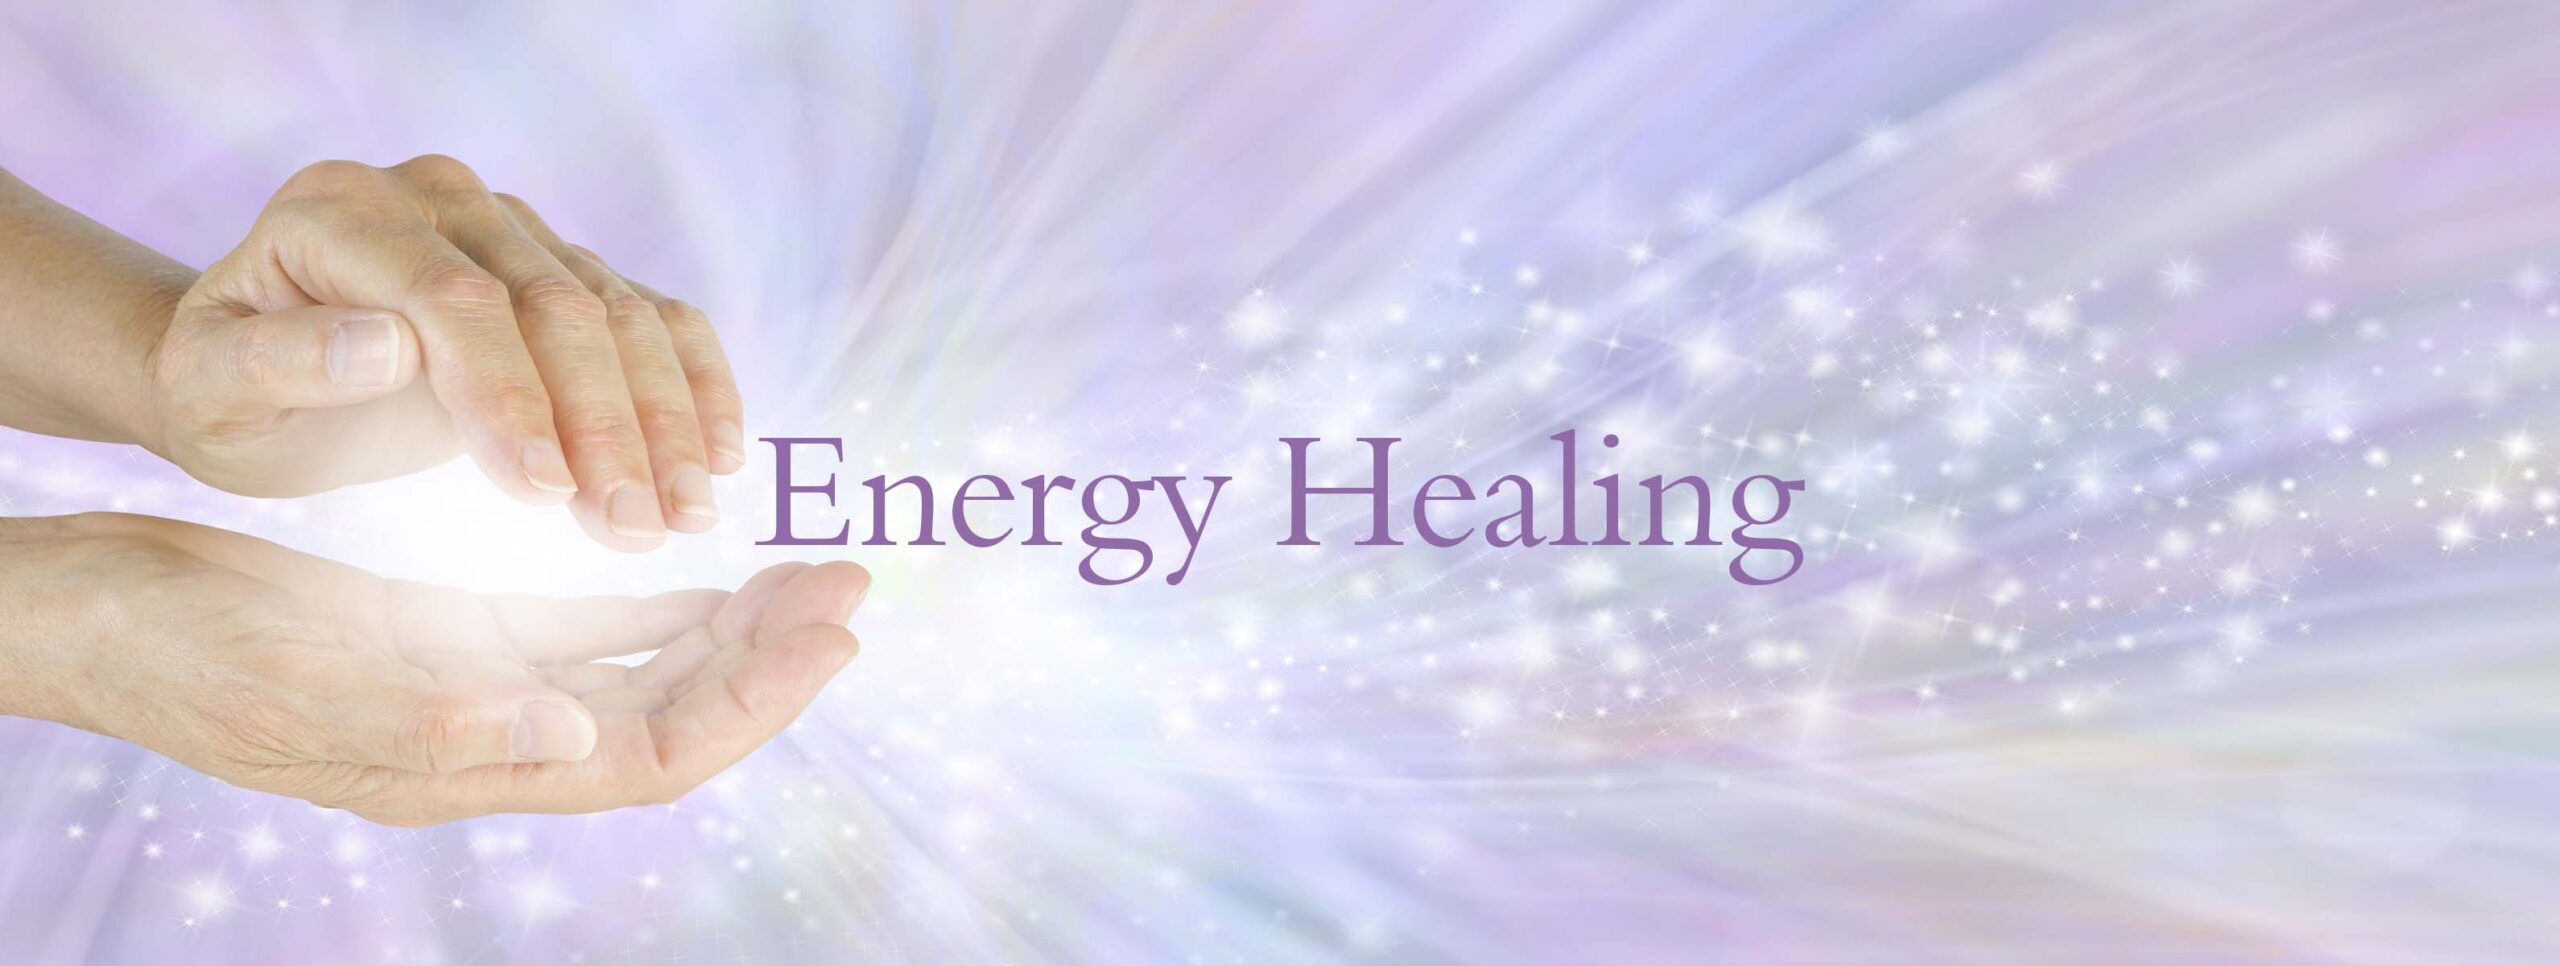 what is energy healing, definition energy healing, explain energy healing, energy healing canada